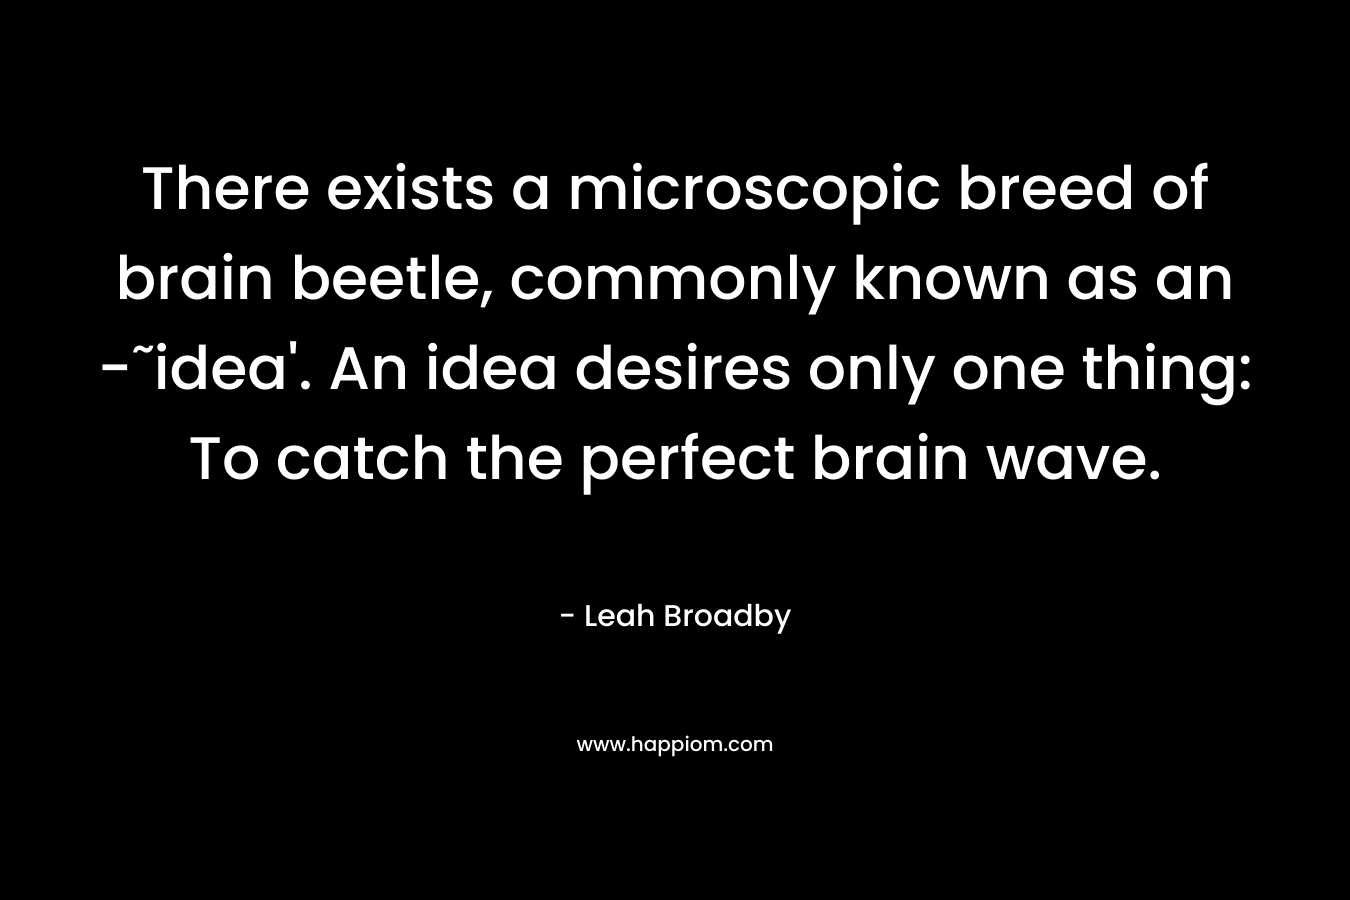 There exists a microscopic breed of brain beetle, commonly known as an -˜idea'. An idea desires only one thing: To catch the perfect brain wave.